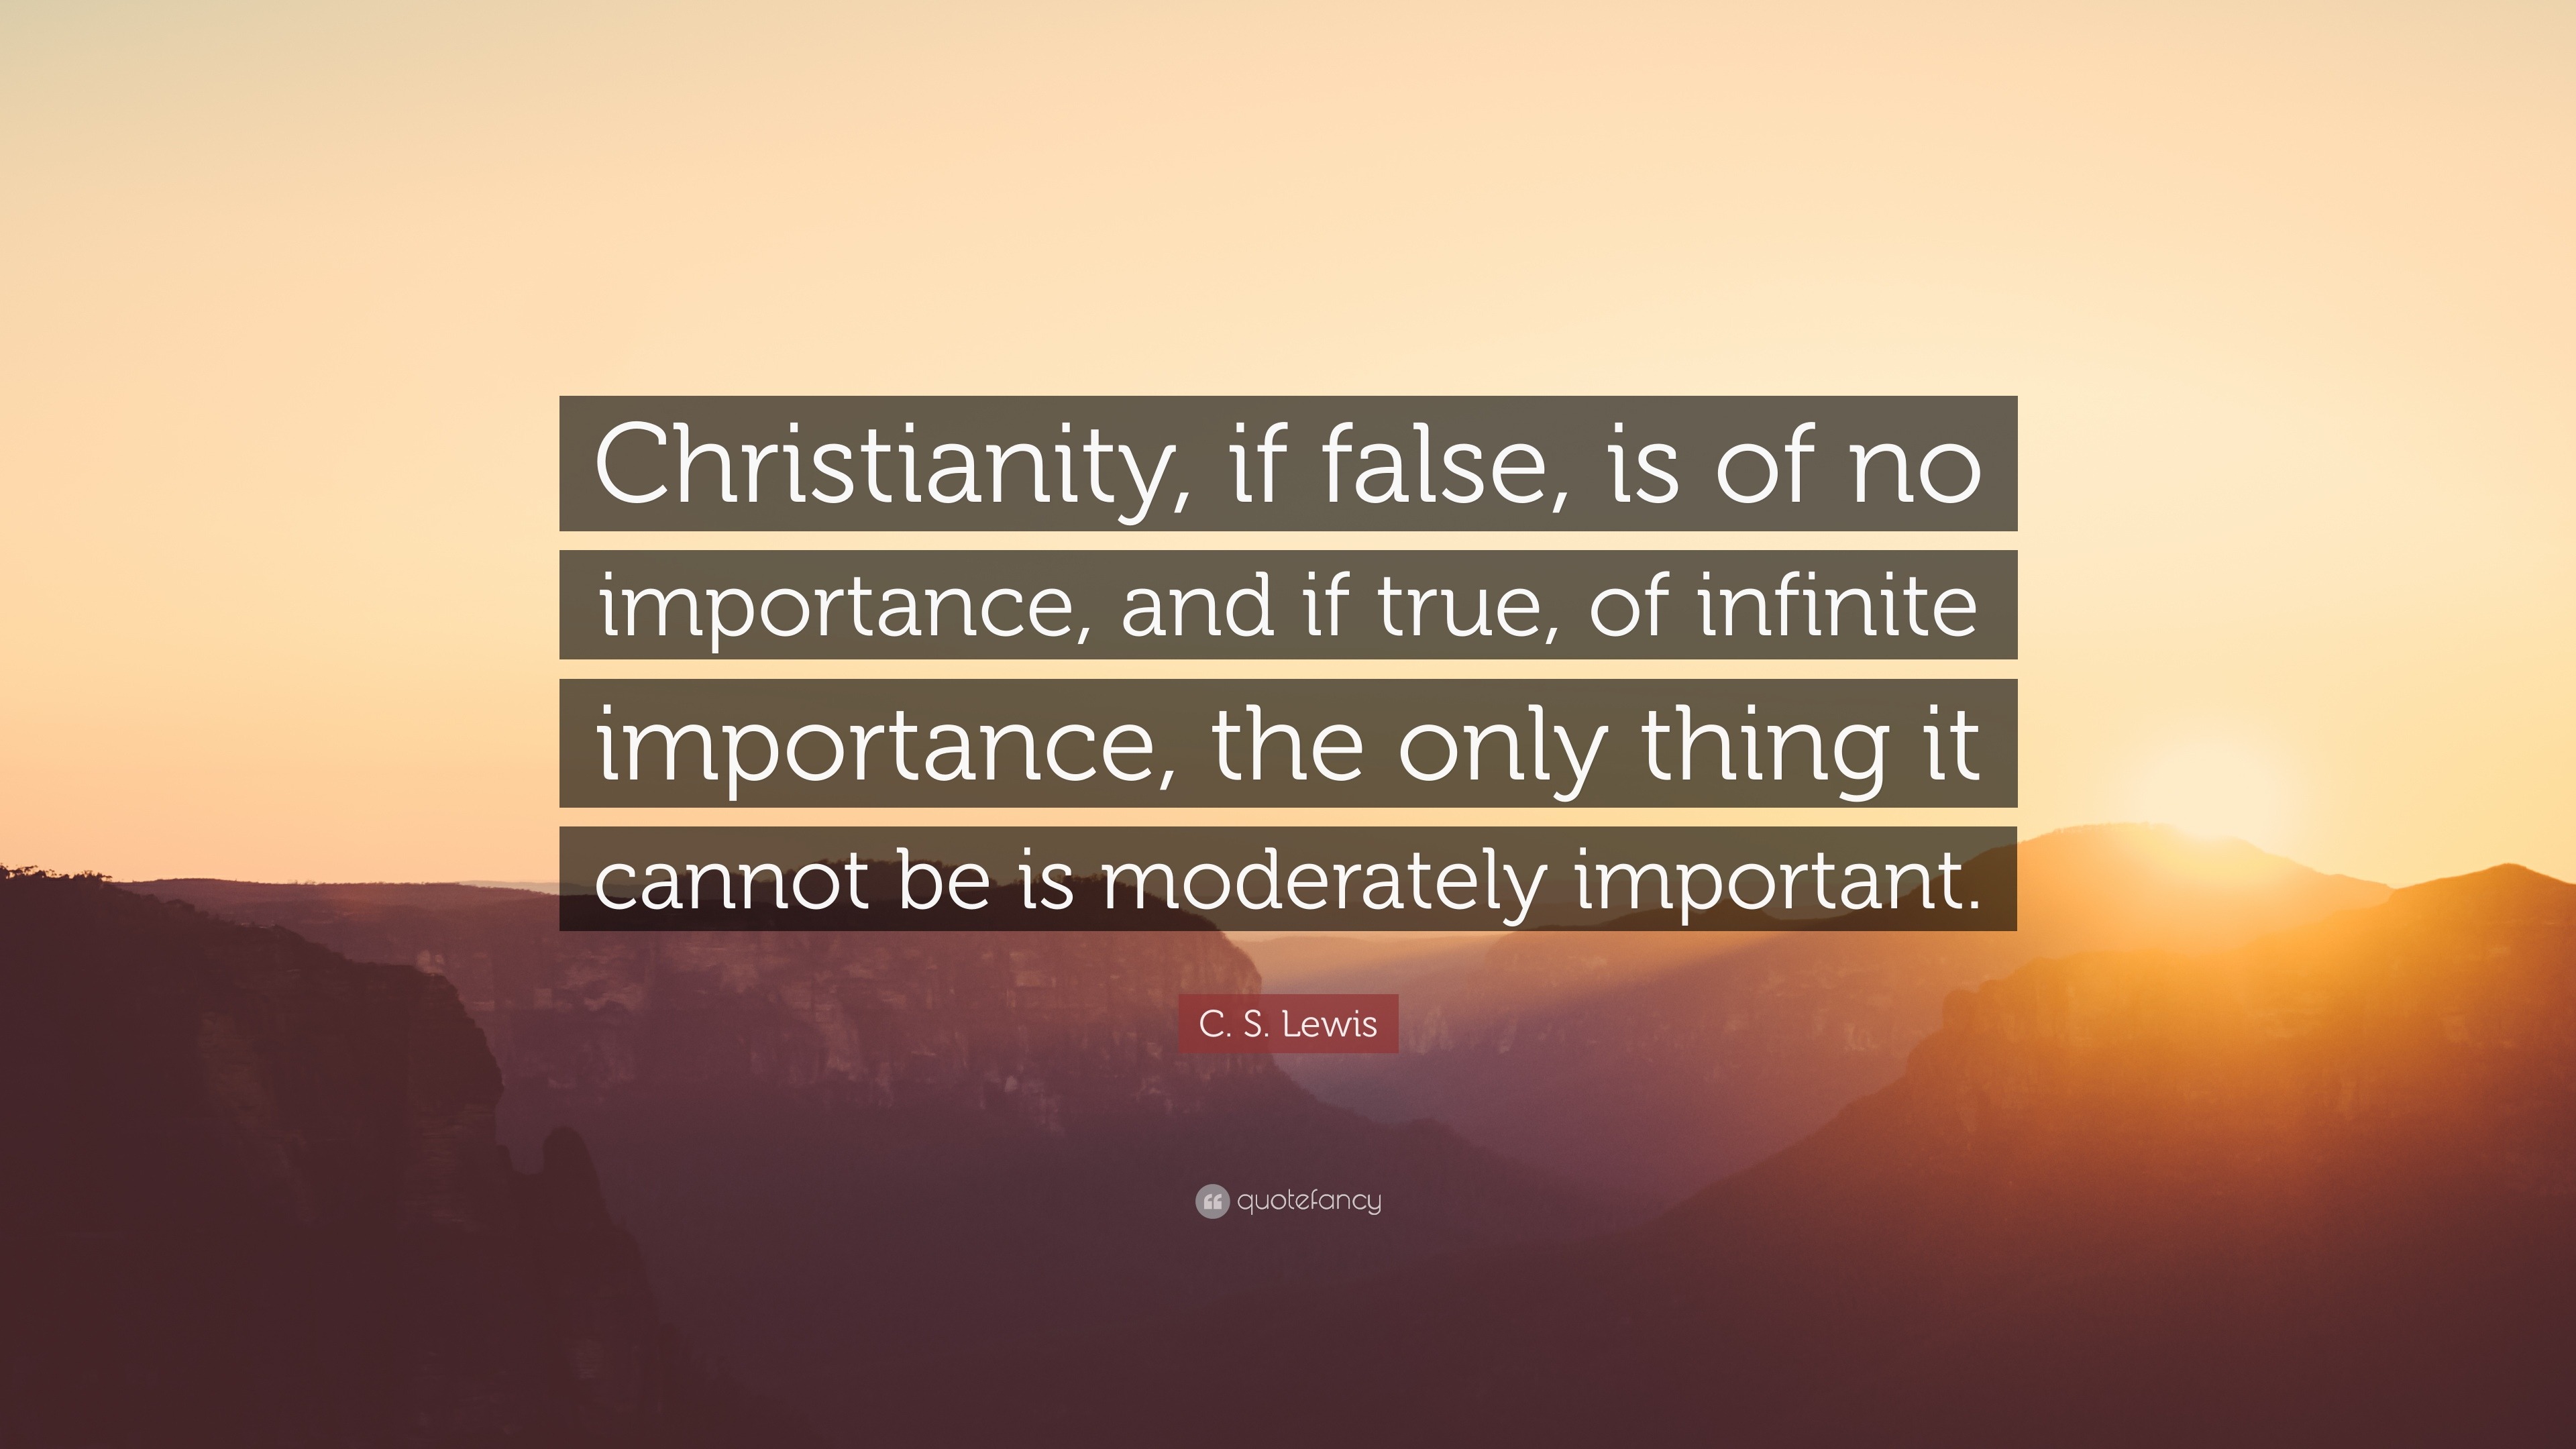 C. S. Lewis Quote: “Christianity, if false, is of no importance, and if